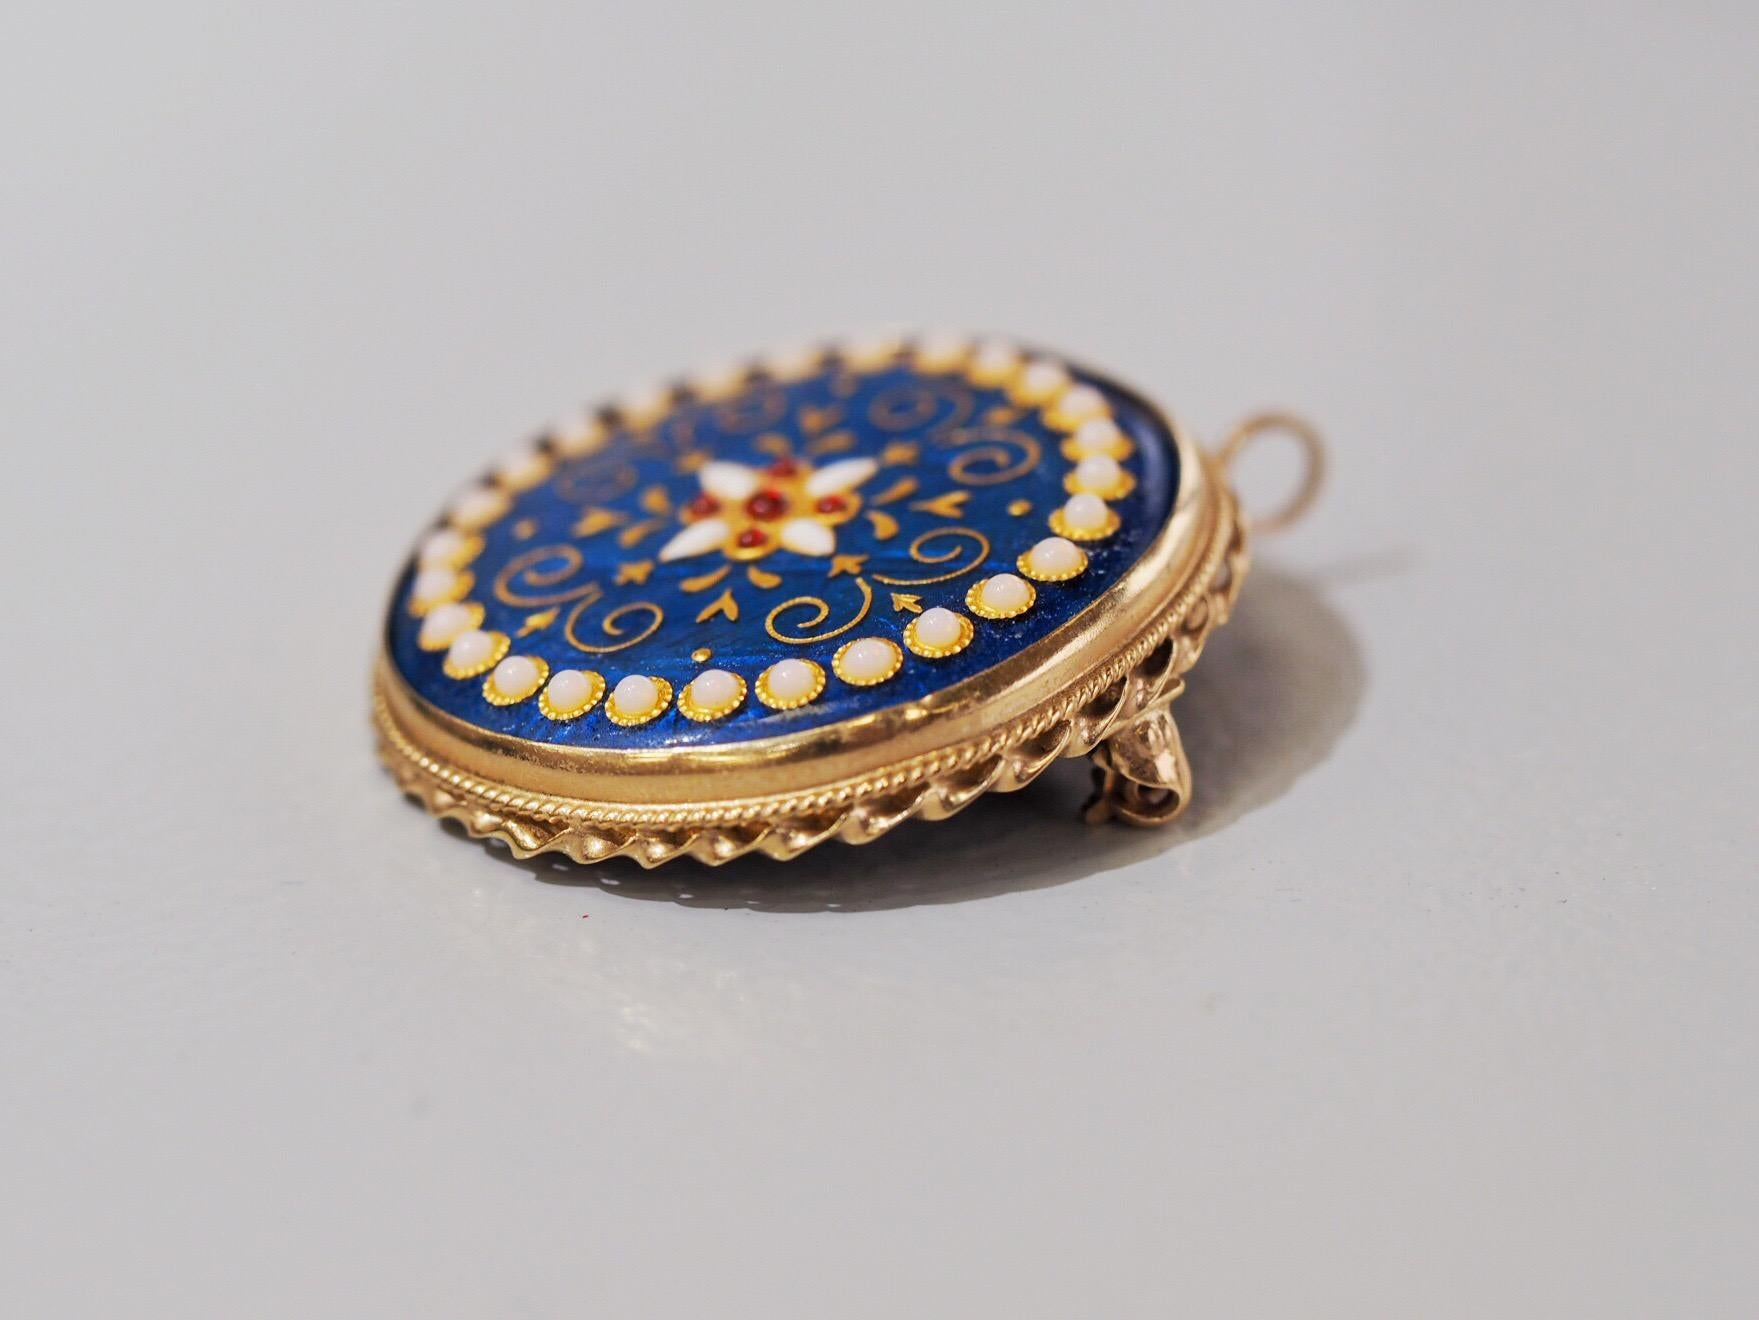 Exquisite Enamel design giving the appearance of pearls on the outer edge and beautiful details in the center that give the appearance of bright red rubies. The details on this pendant brooch are  truly amazing and vibrant. The versatility adds a